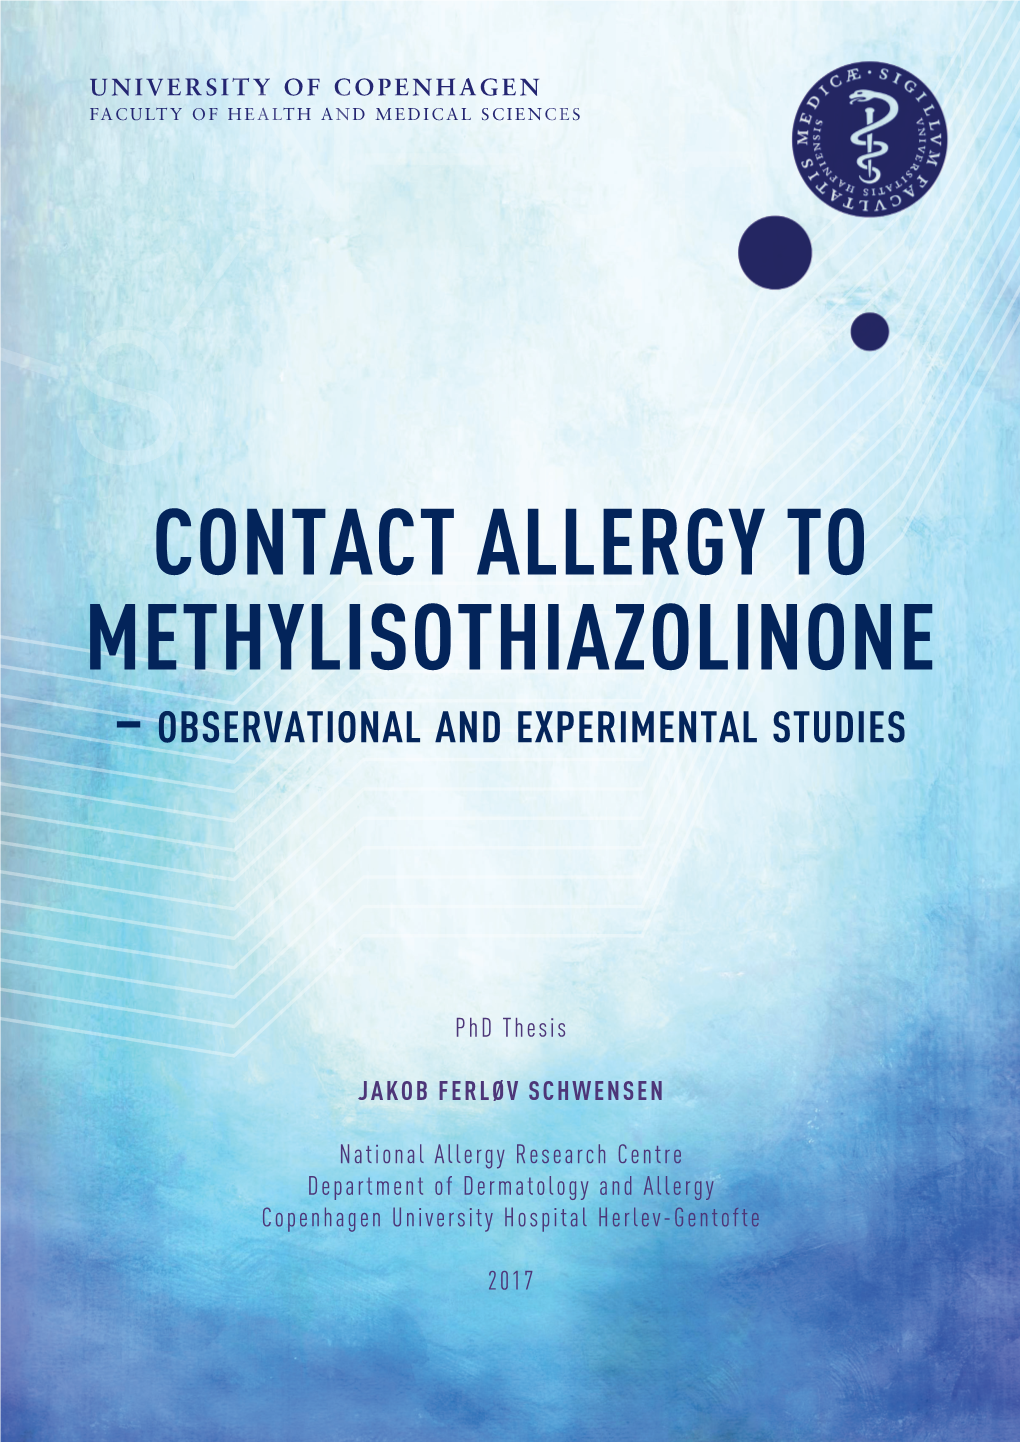 Contact Allergy to Methylisothiazolinone – Observational and Experimental Studies